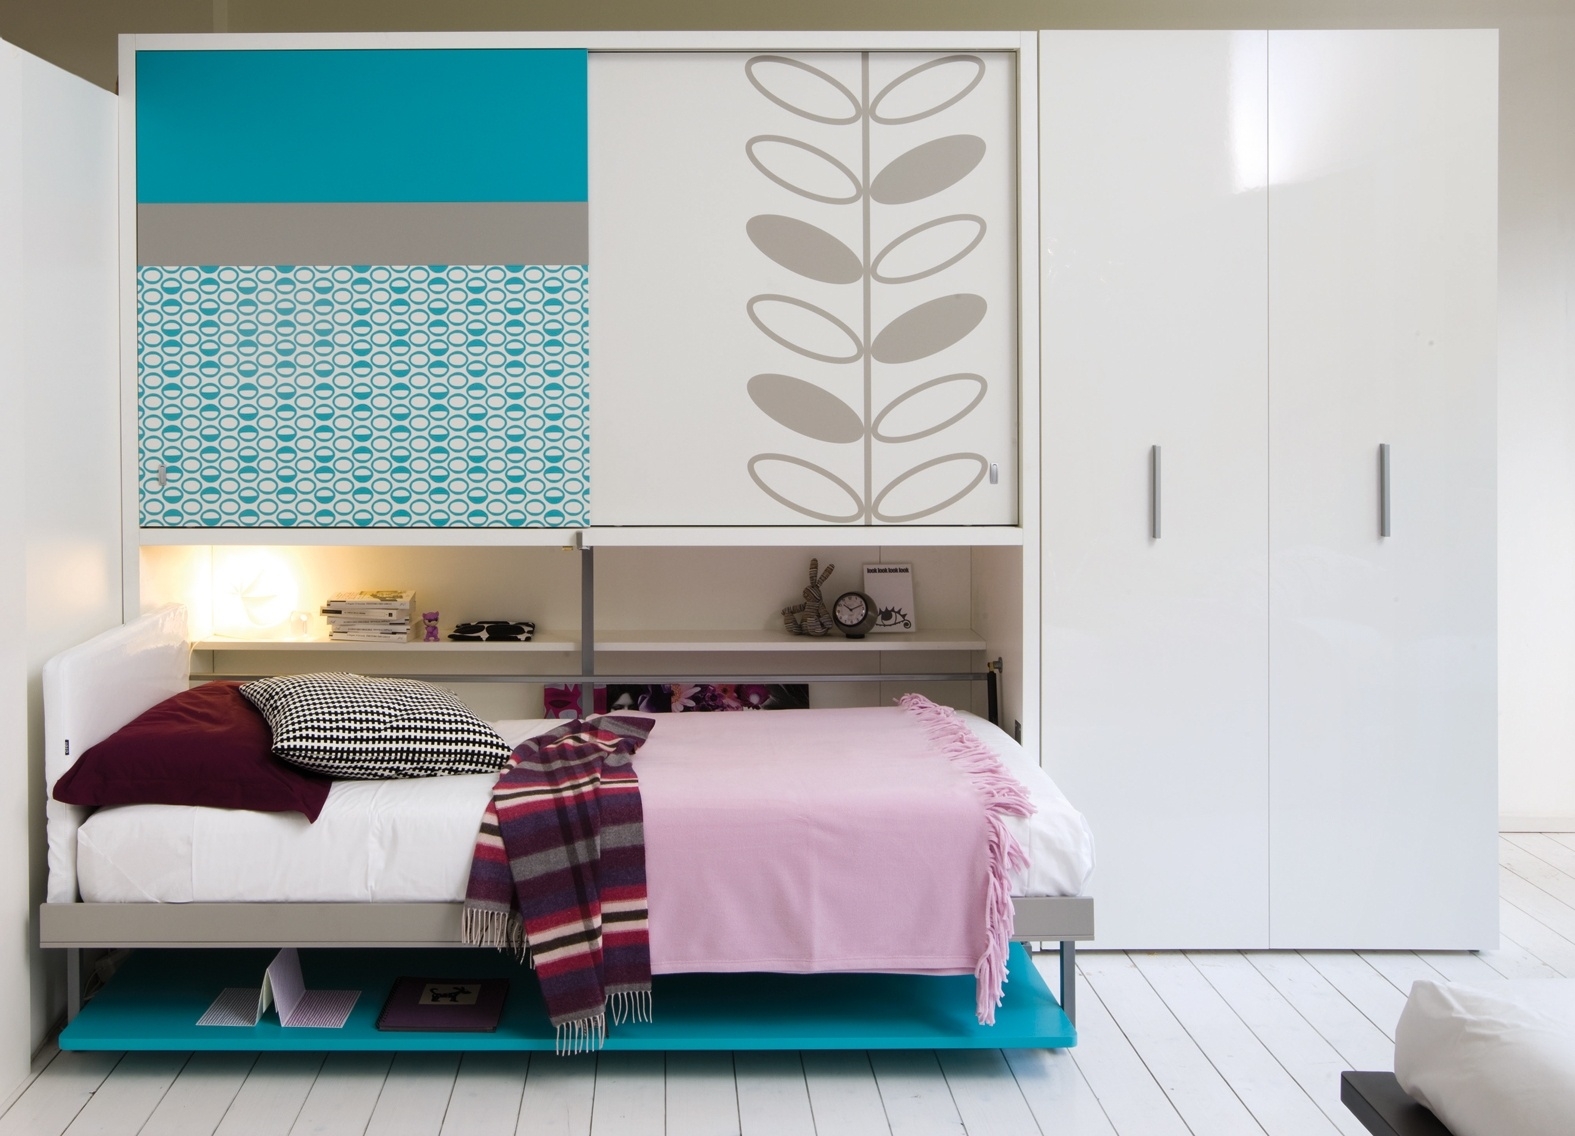 Kids room decor with fun trundle bed also hidden turquoise